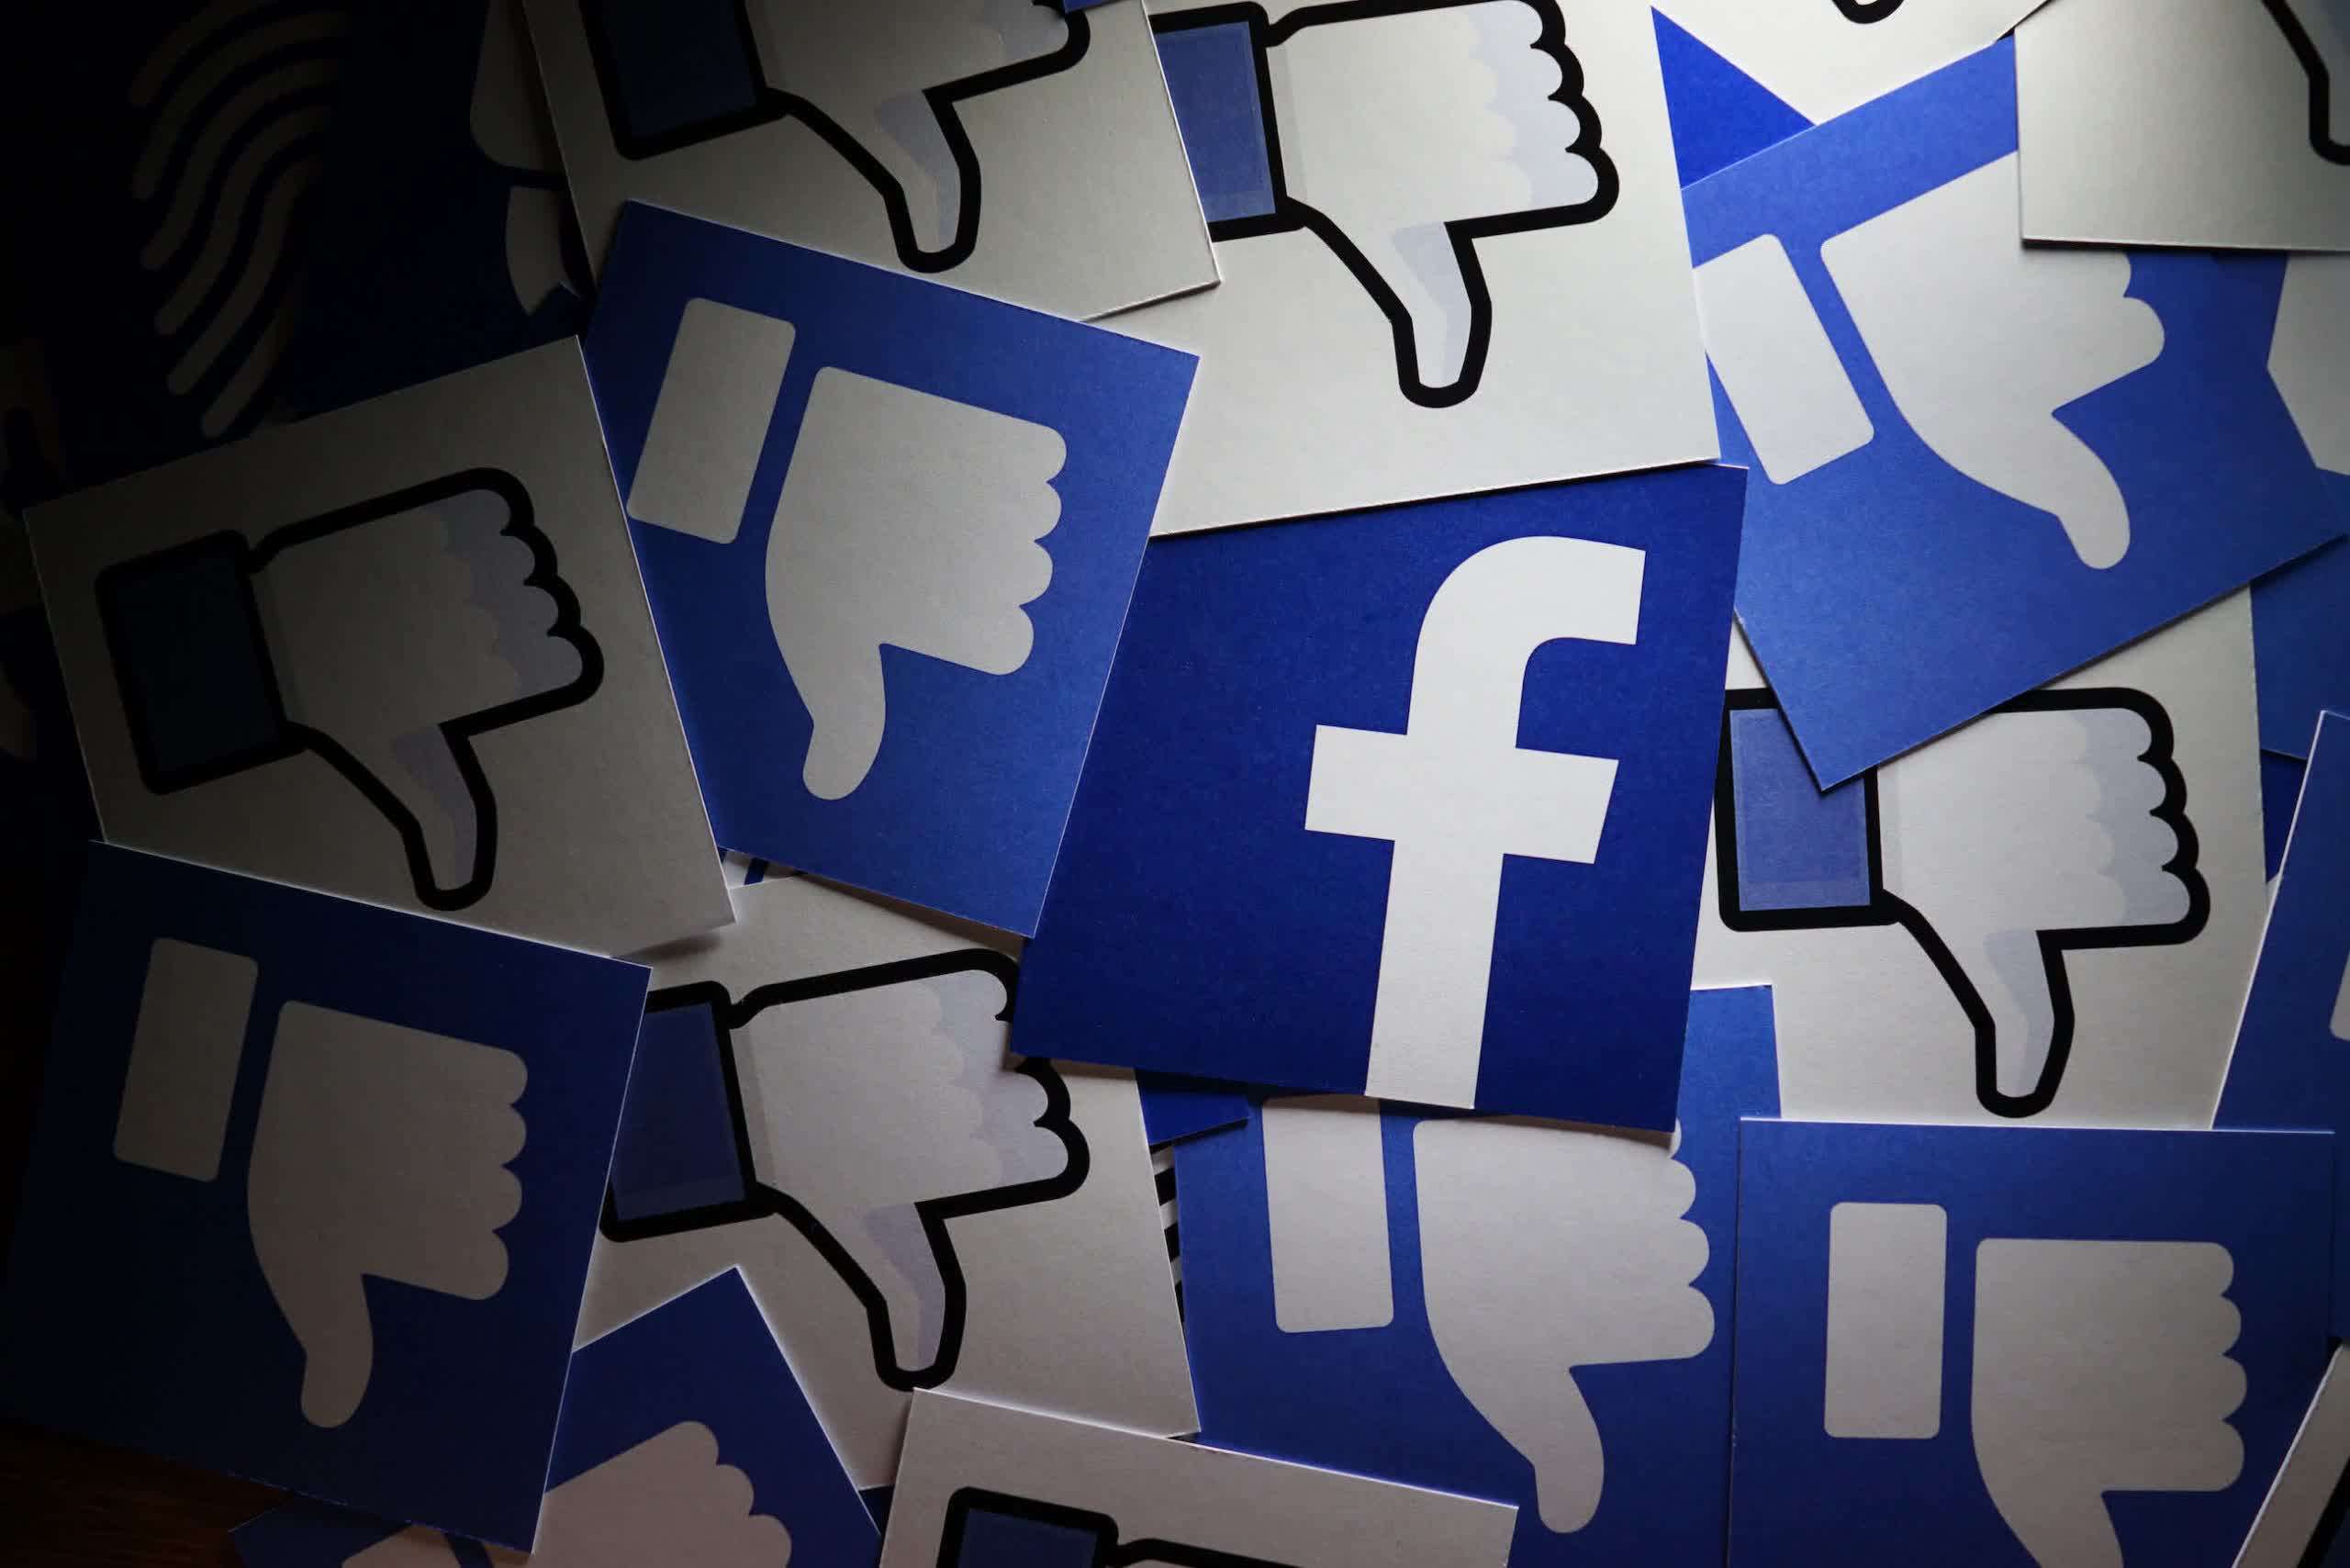 Lazy users freak out as 'configuration changes' caused massive Facebook logout